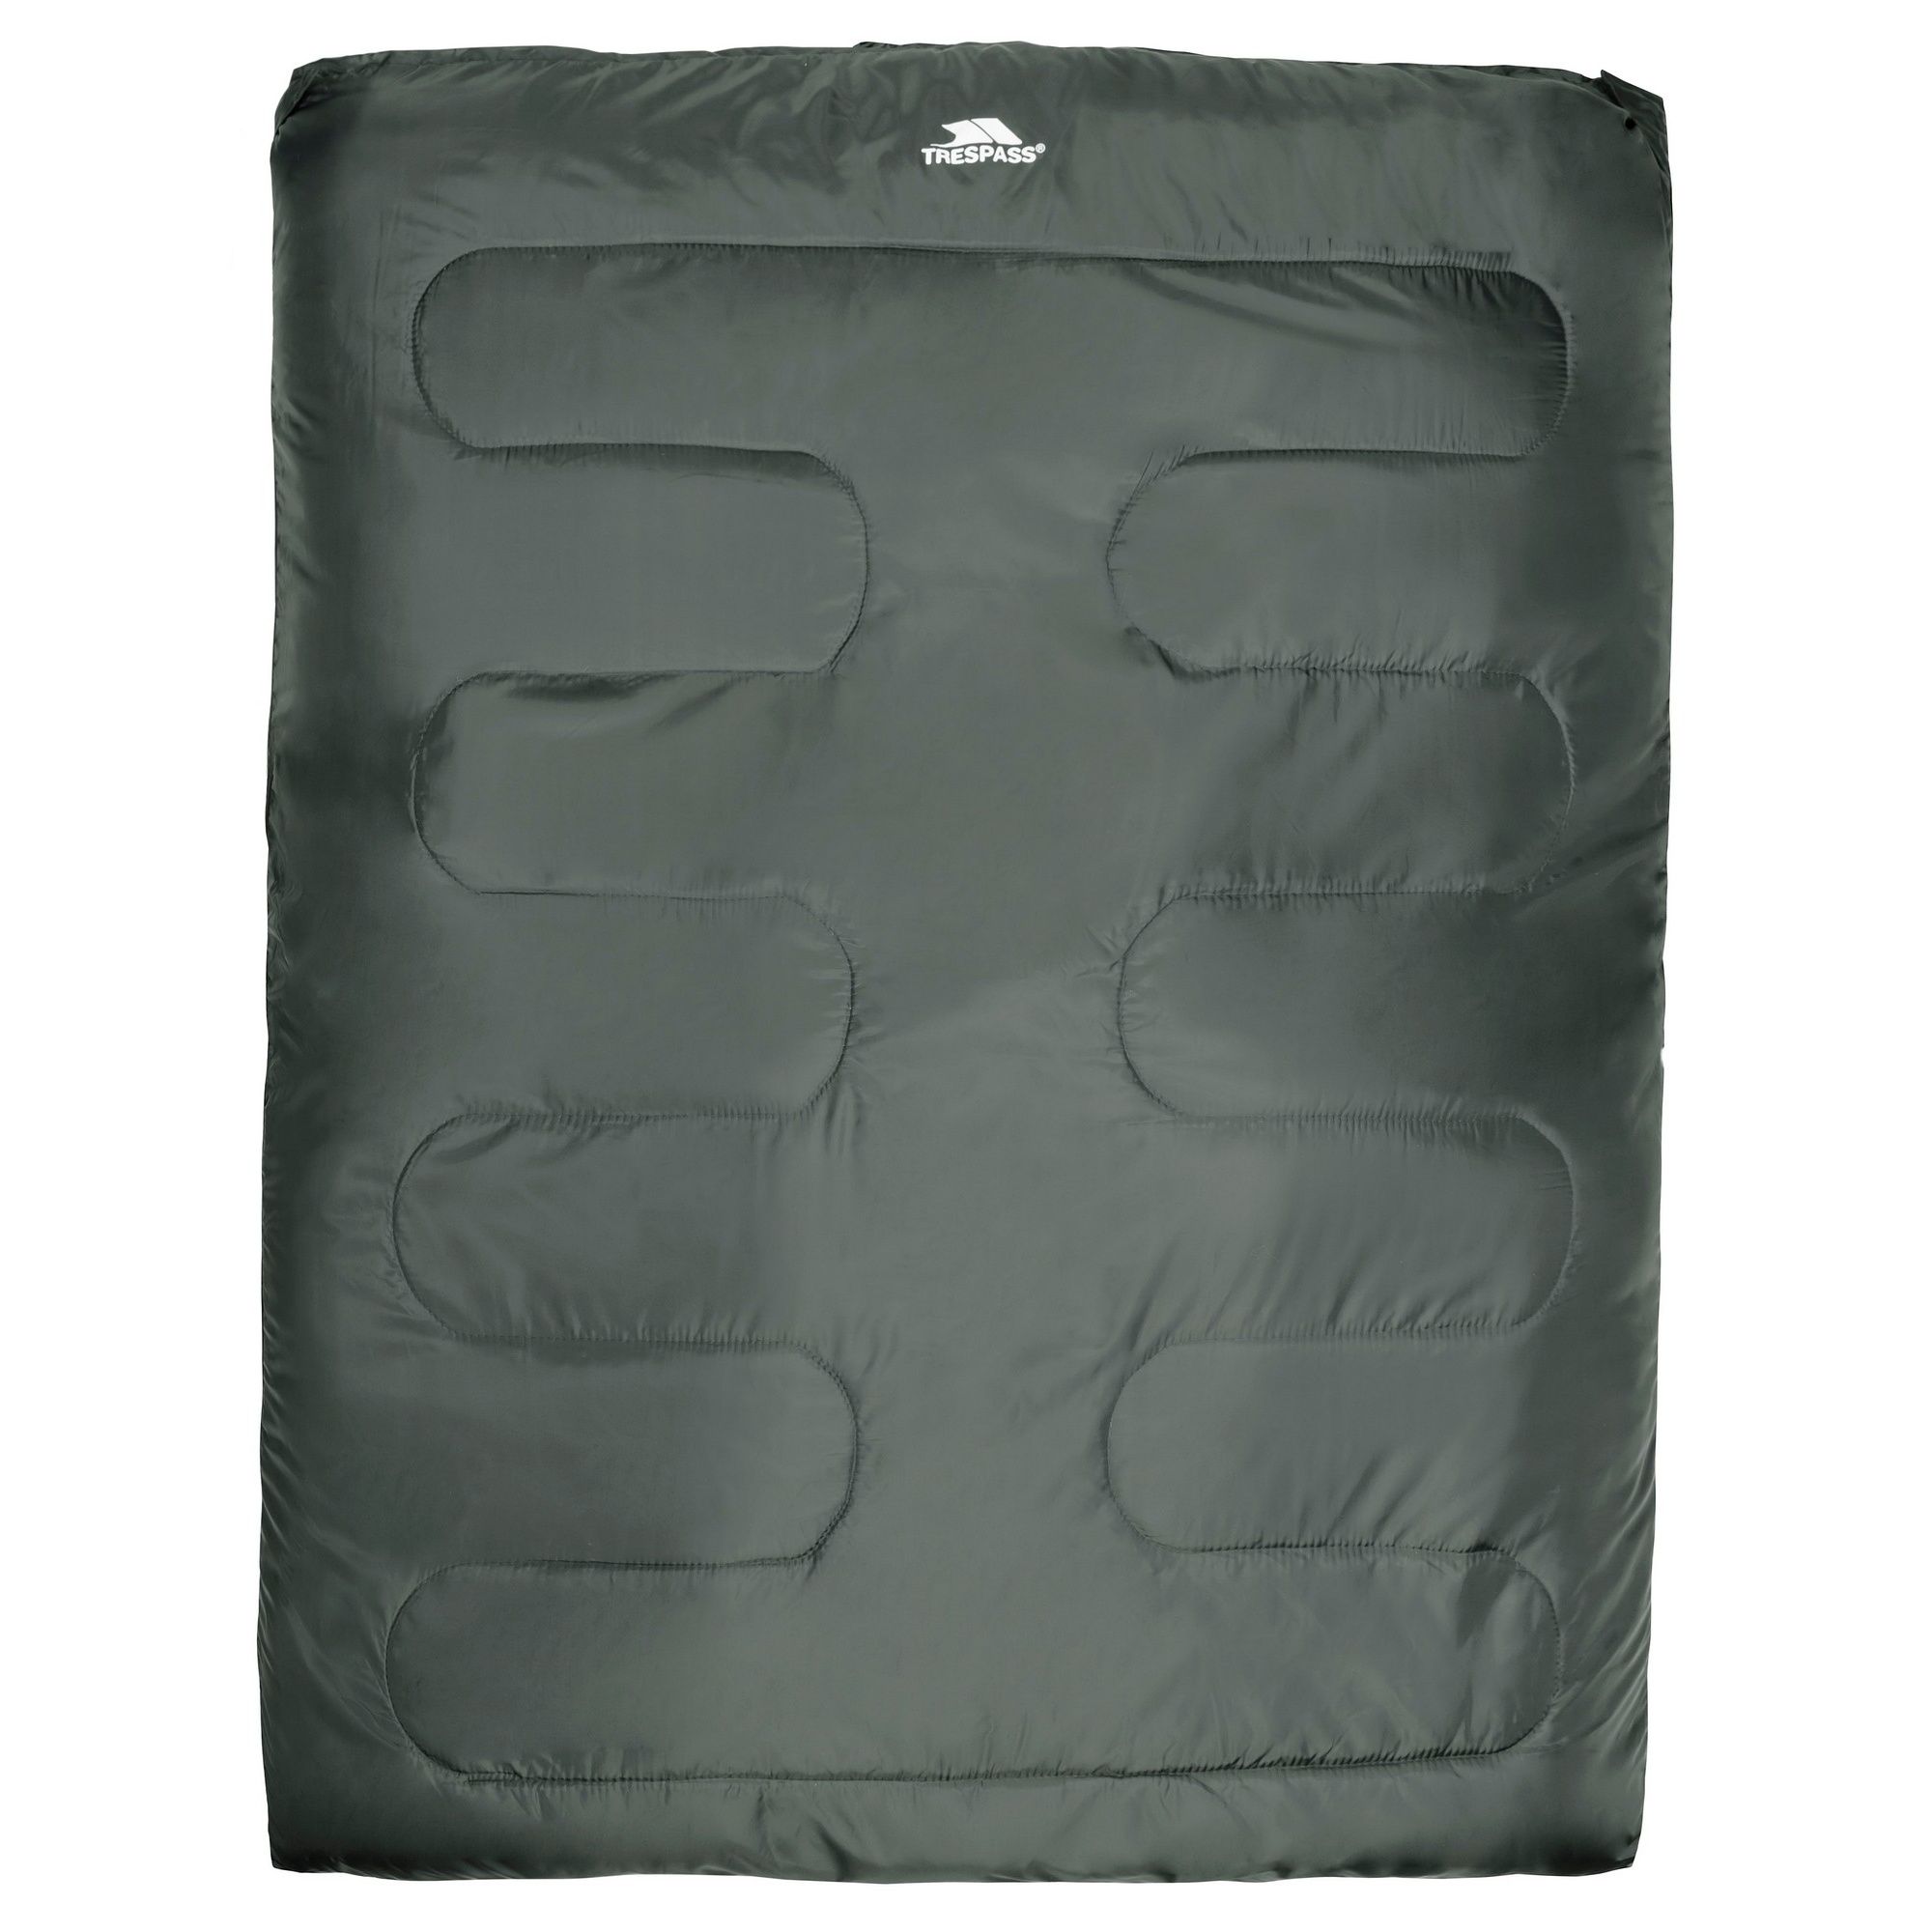 3 Season Double Sleeping Bag. 180cm x 140cm. Shell: 100% Polyester, Water repellent, Lining: 65% Polyester/35% Cotton, Filling: 100% Polyester. Upper limit: +22C, comfort: +13C, lower limit: -3C.